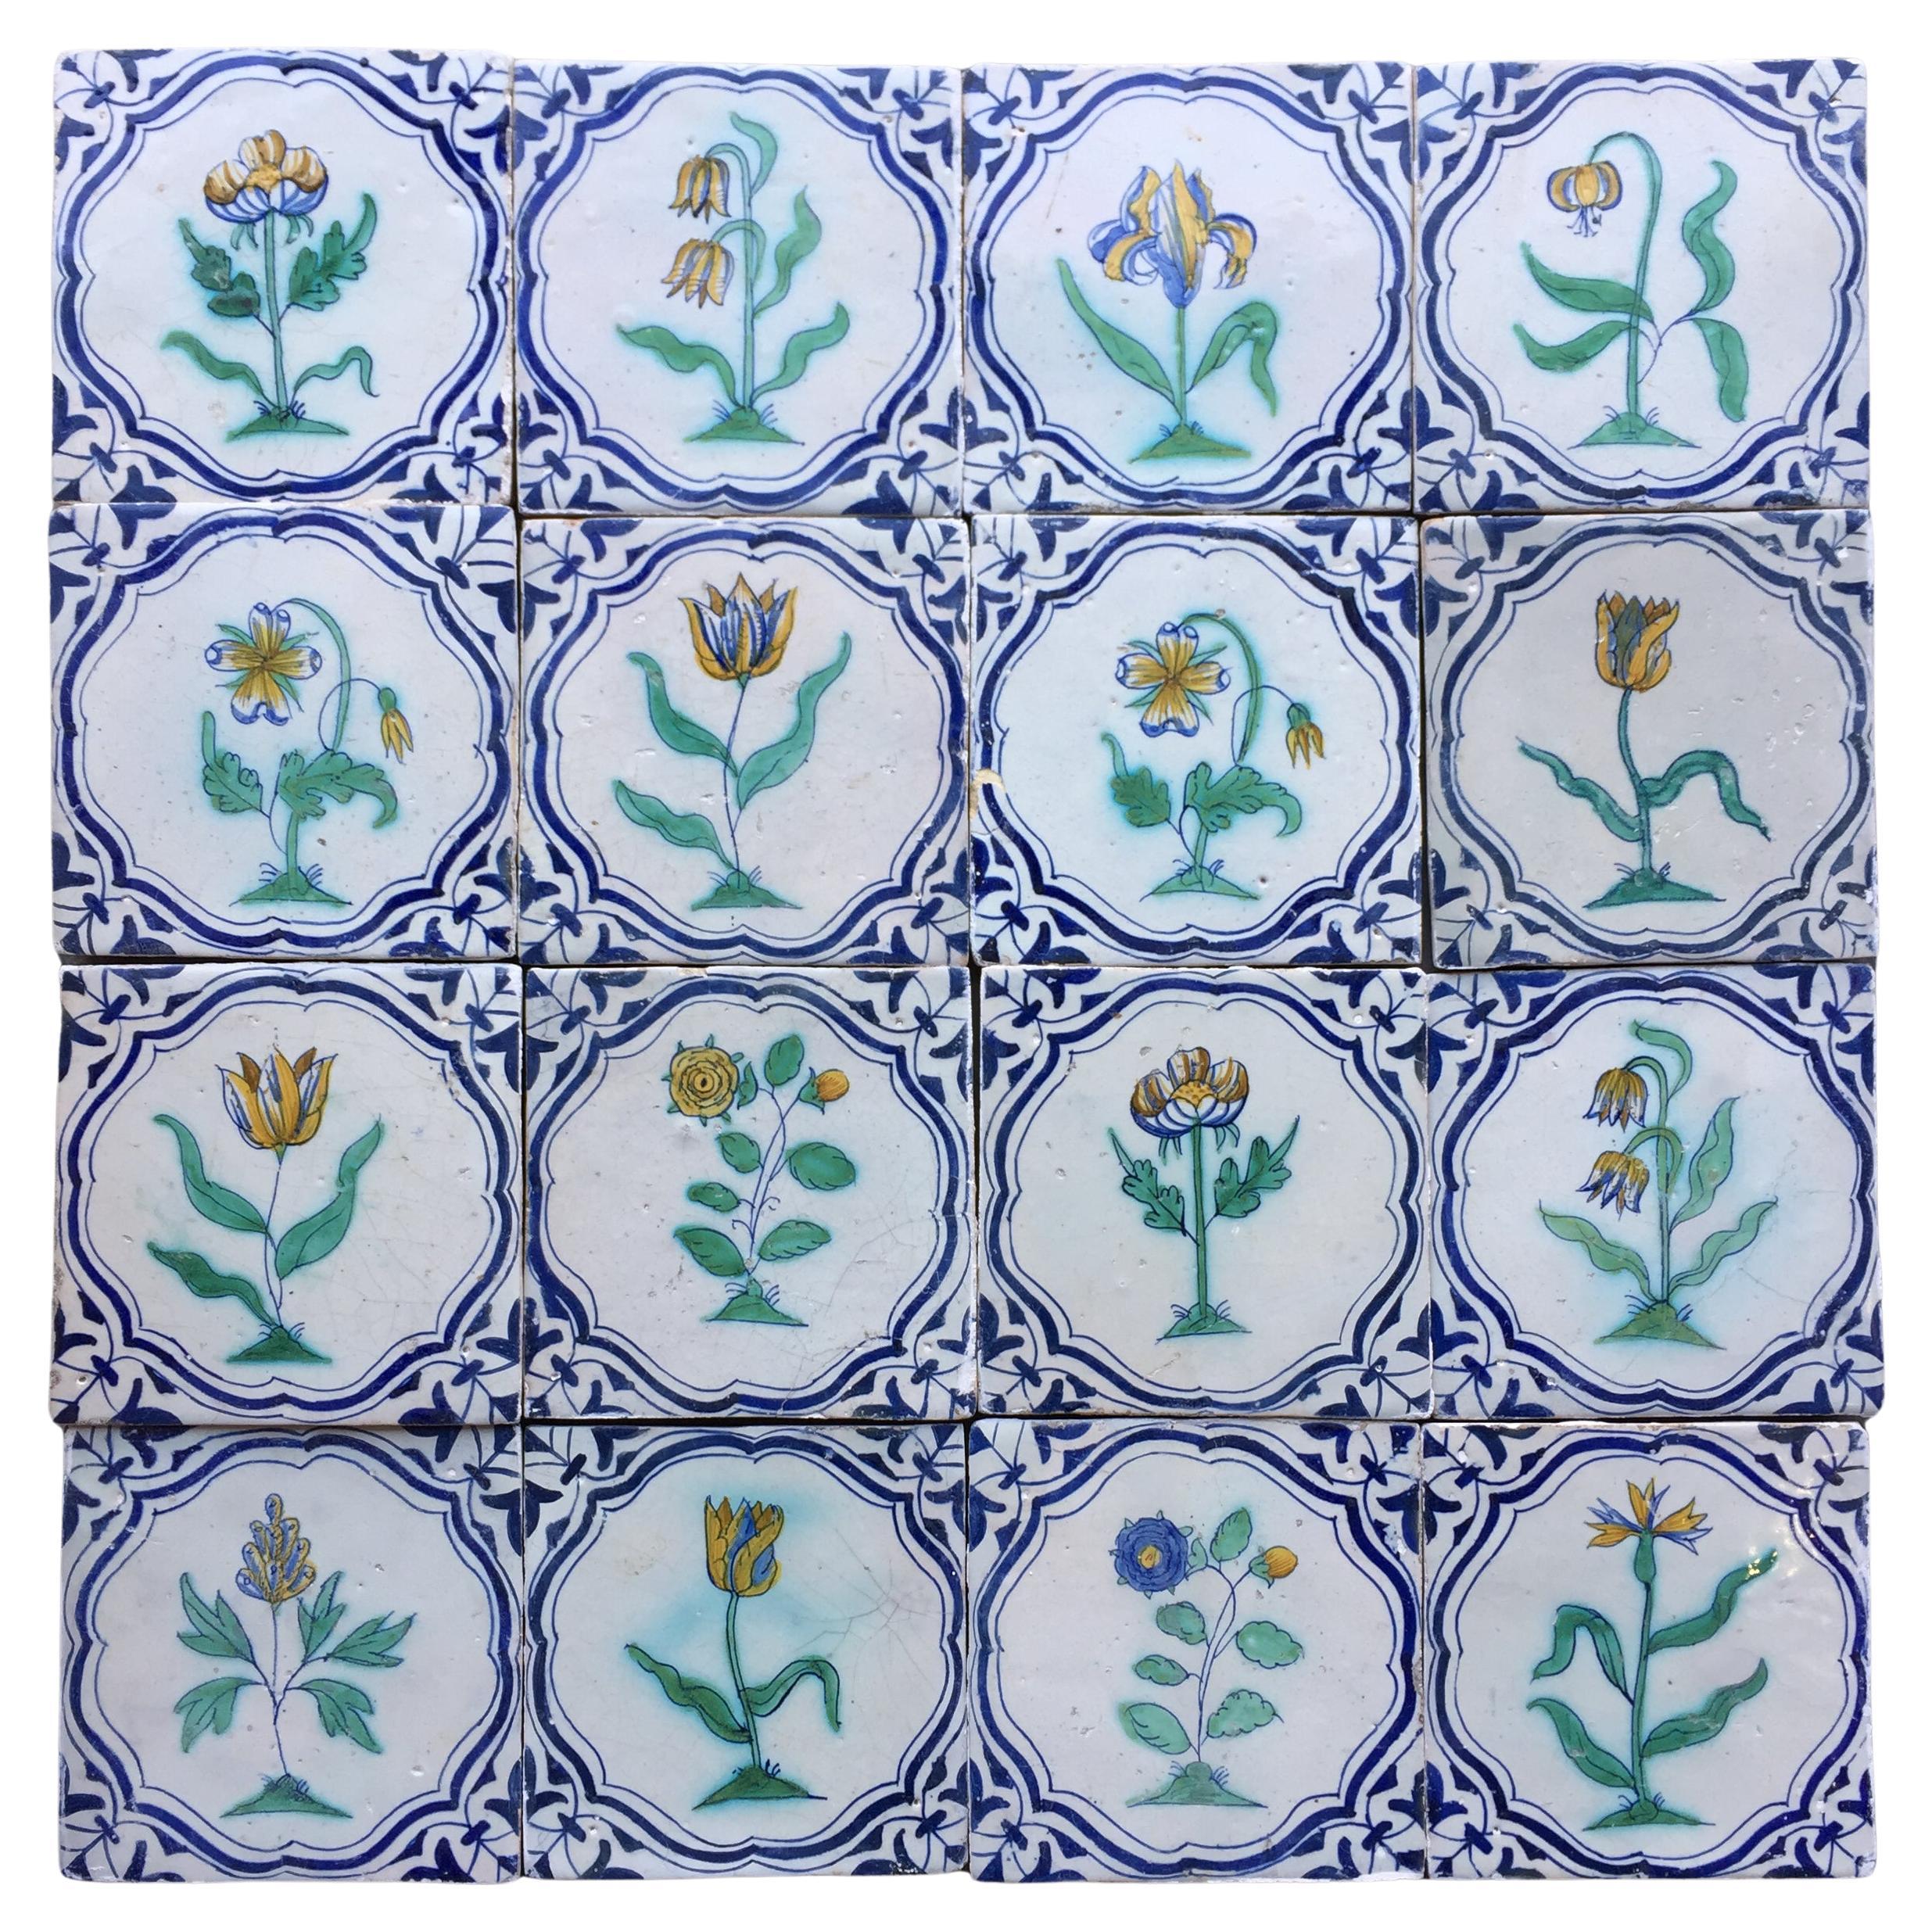 Important and Rare Set of Dutch Delft Tiles with Flowers, Early 17th Century